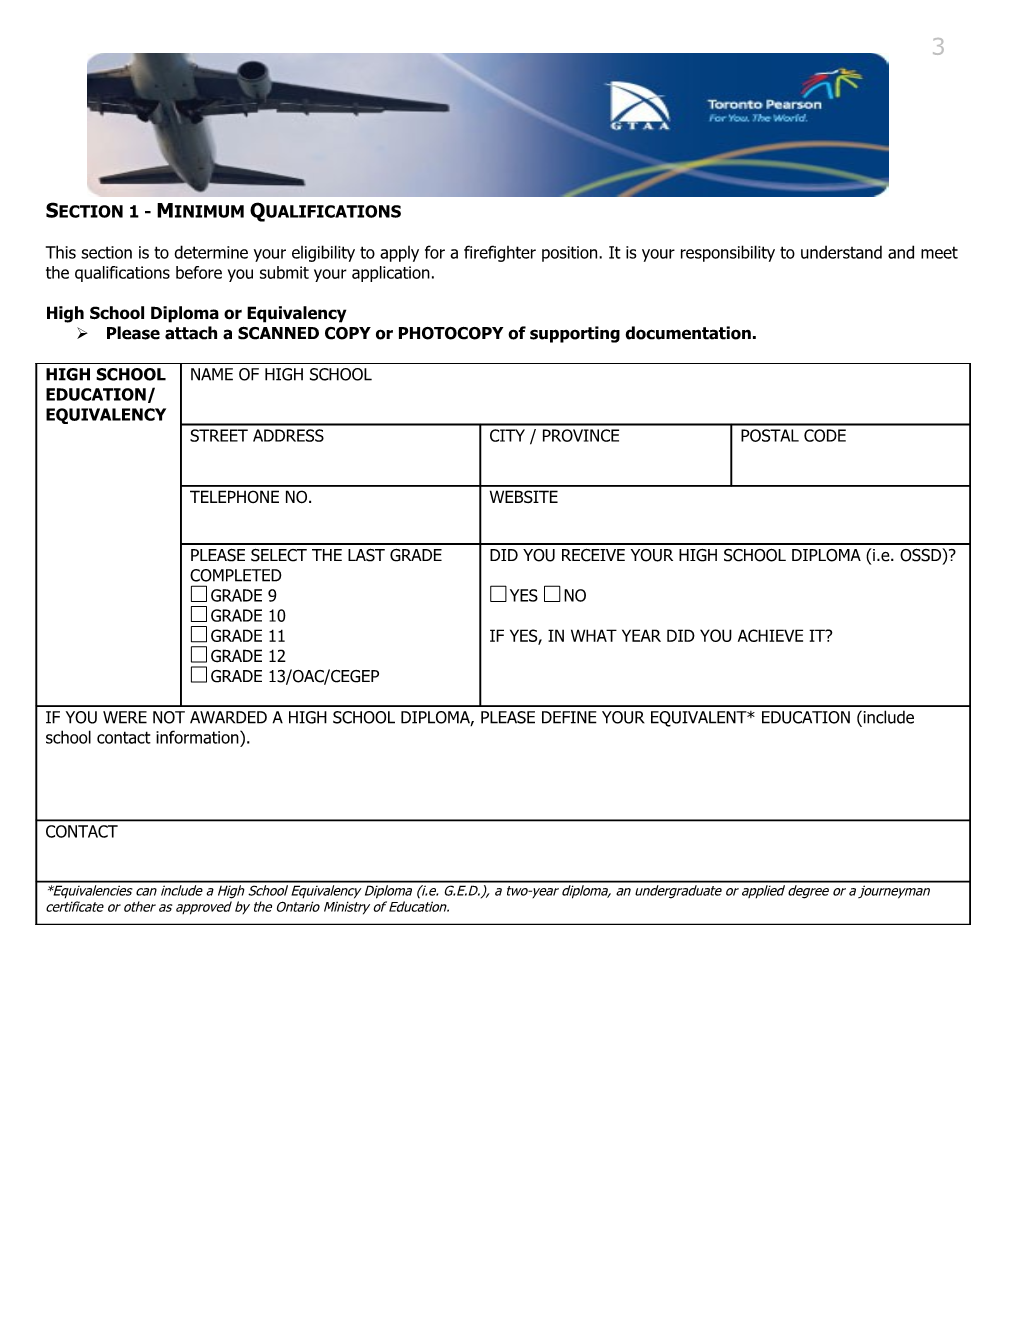 Fire Fighter Employment Application Form